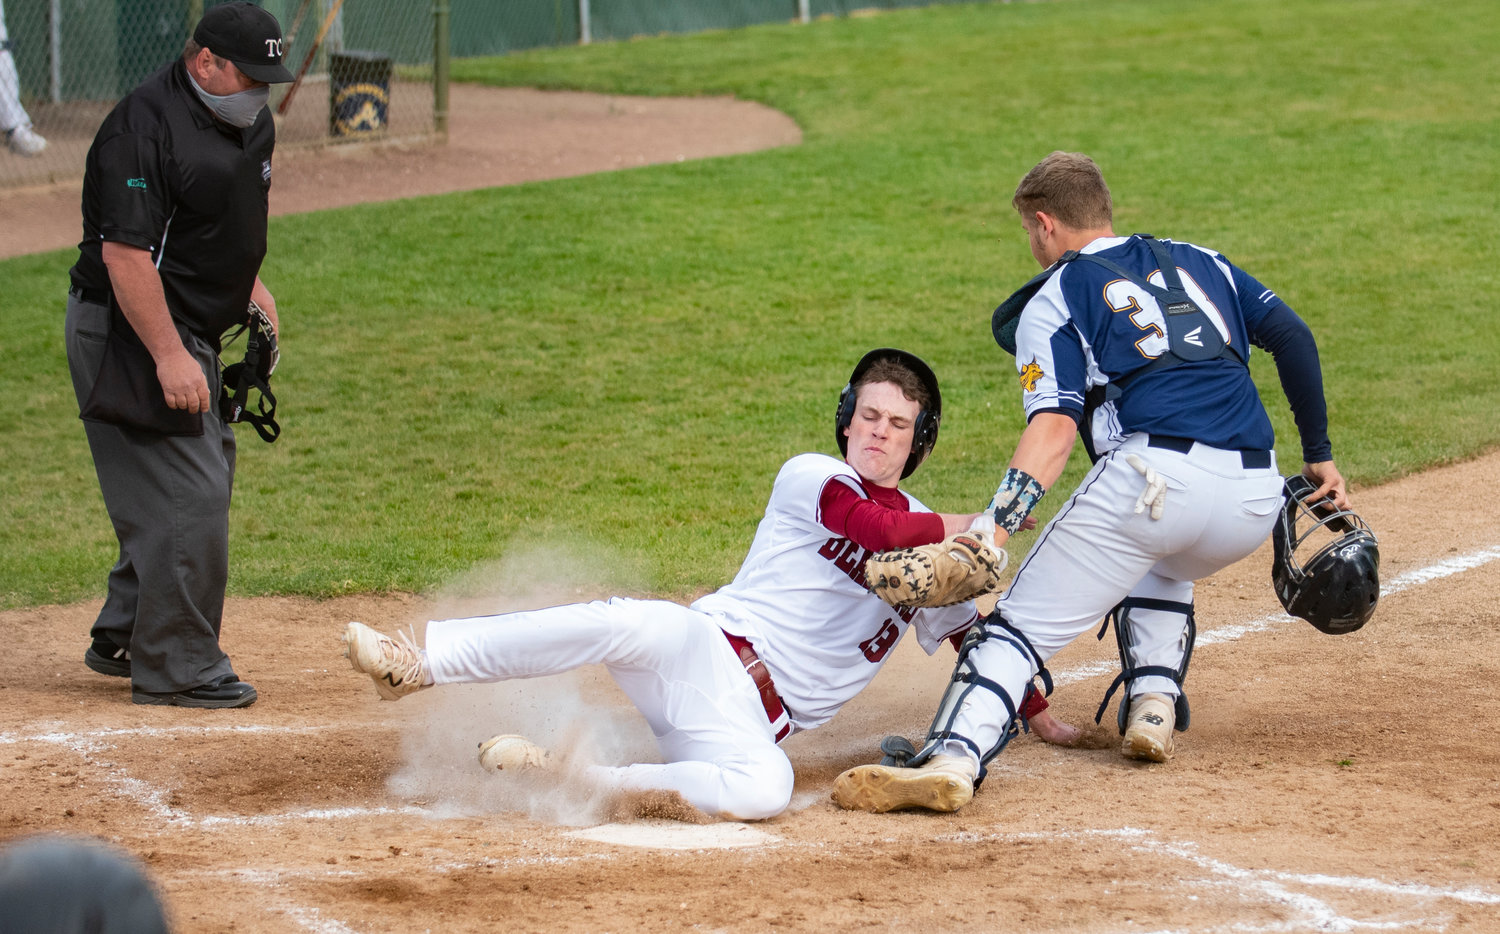 W.F. West's Gavin Fugate is tagged out at home plate by Aberdeen on Friday.